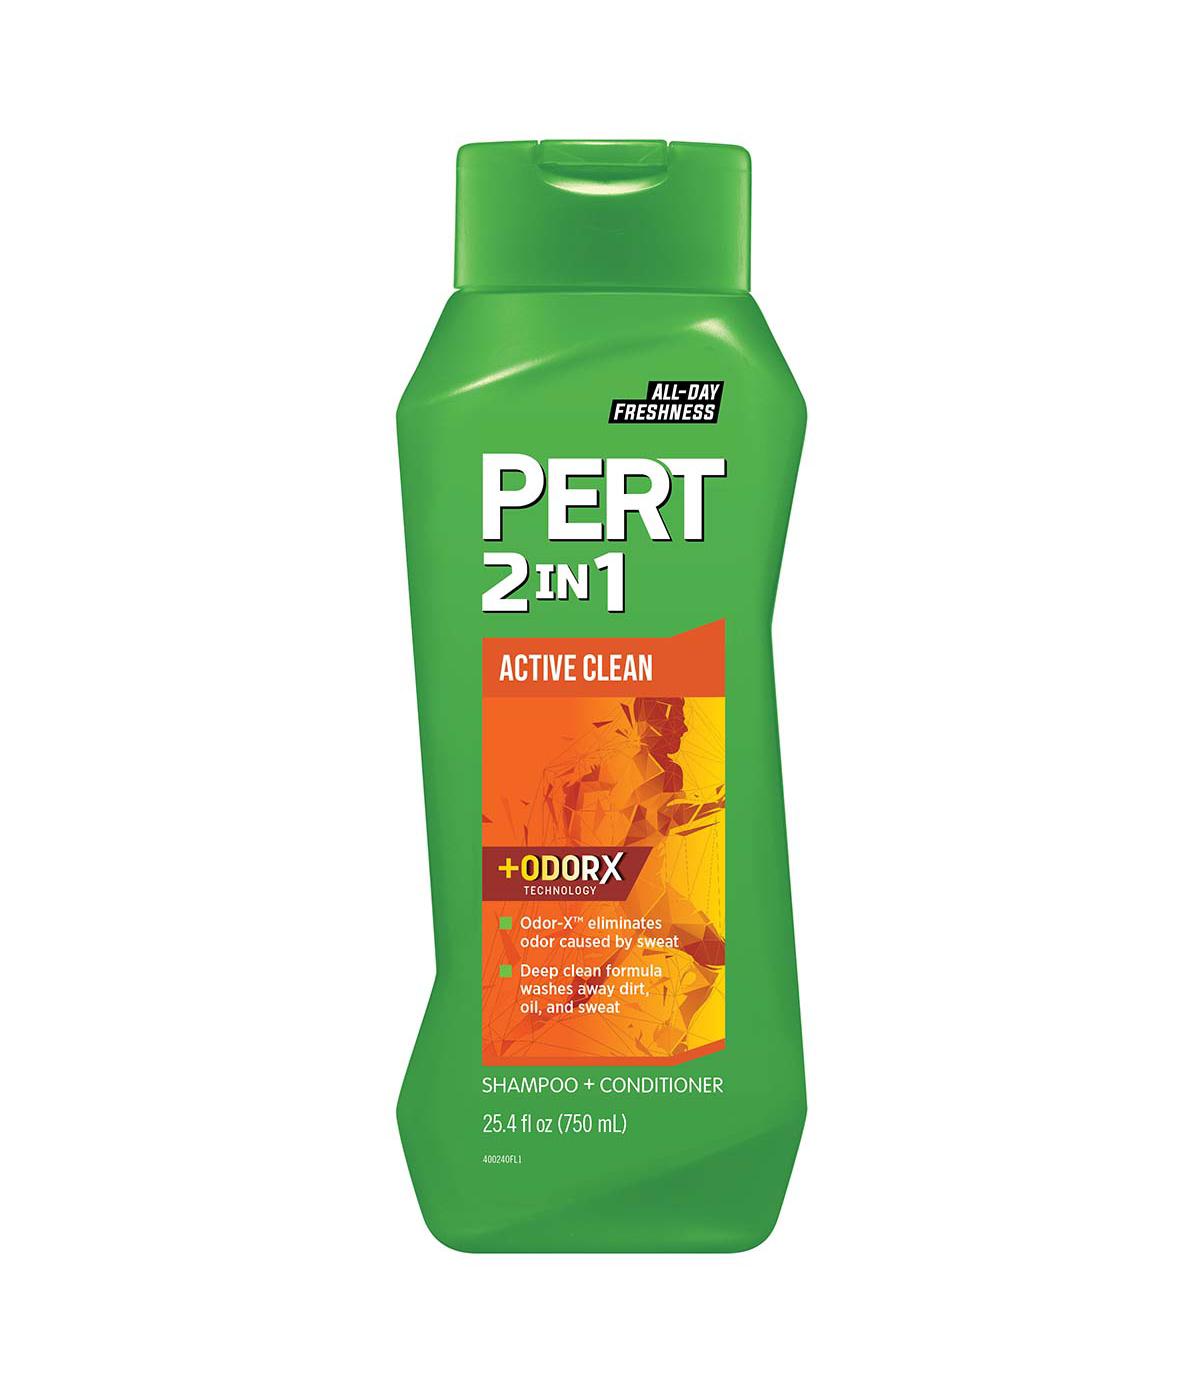 Pert 2 In 1 Active Clean Shampoo + Conditioner; image 1 of 2